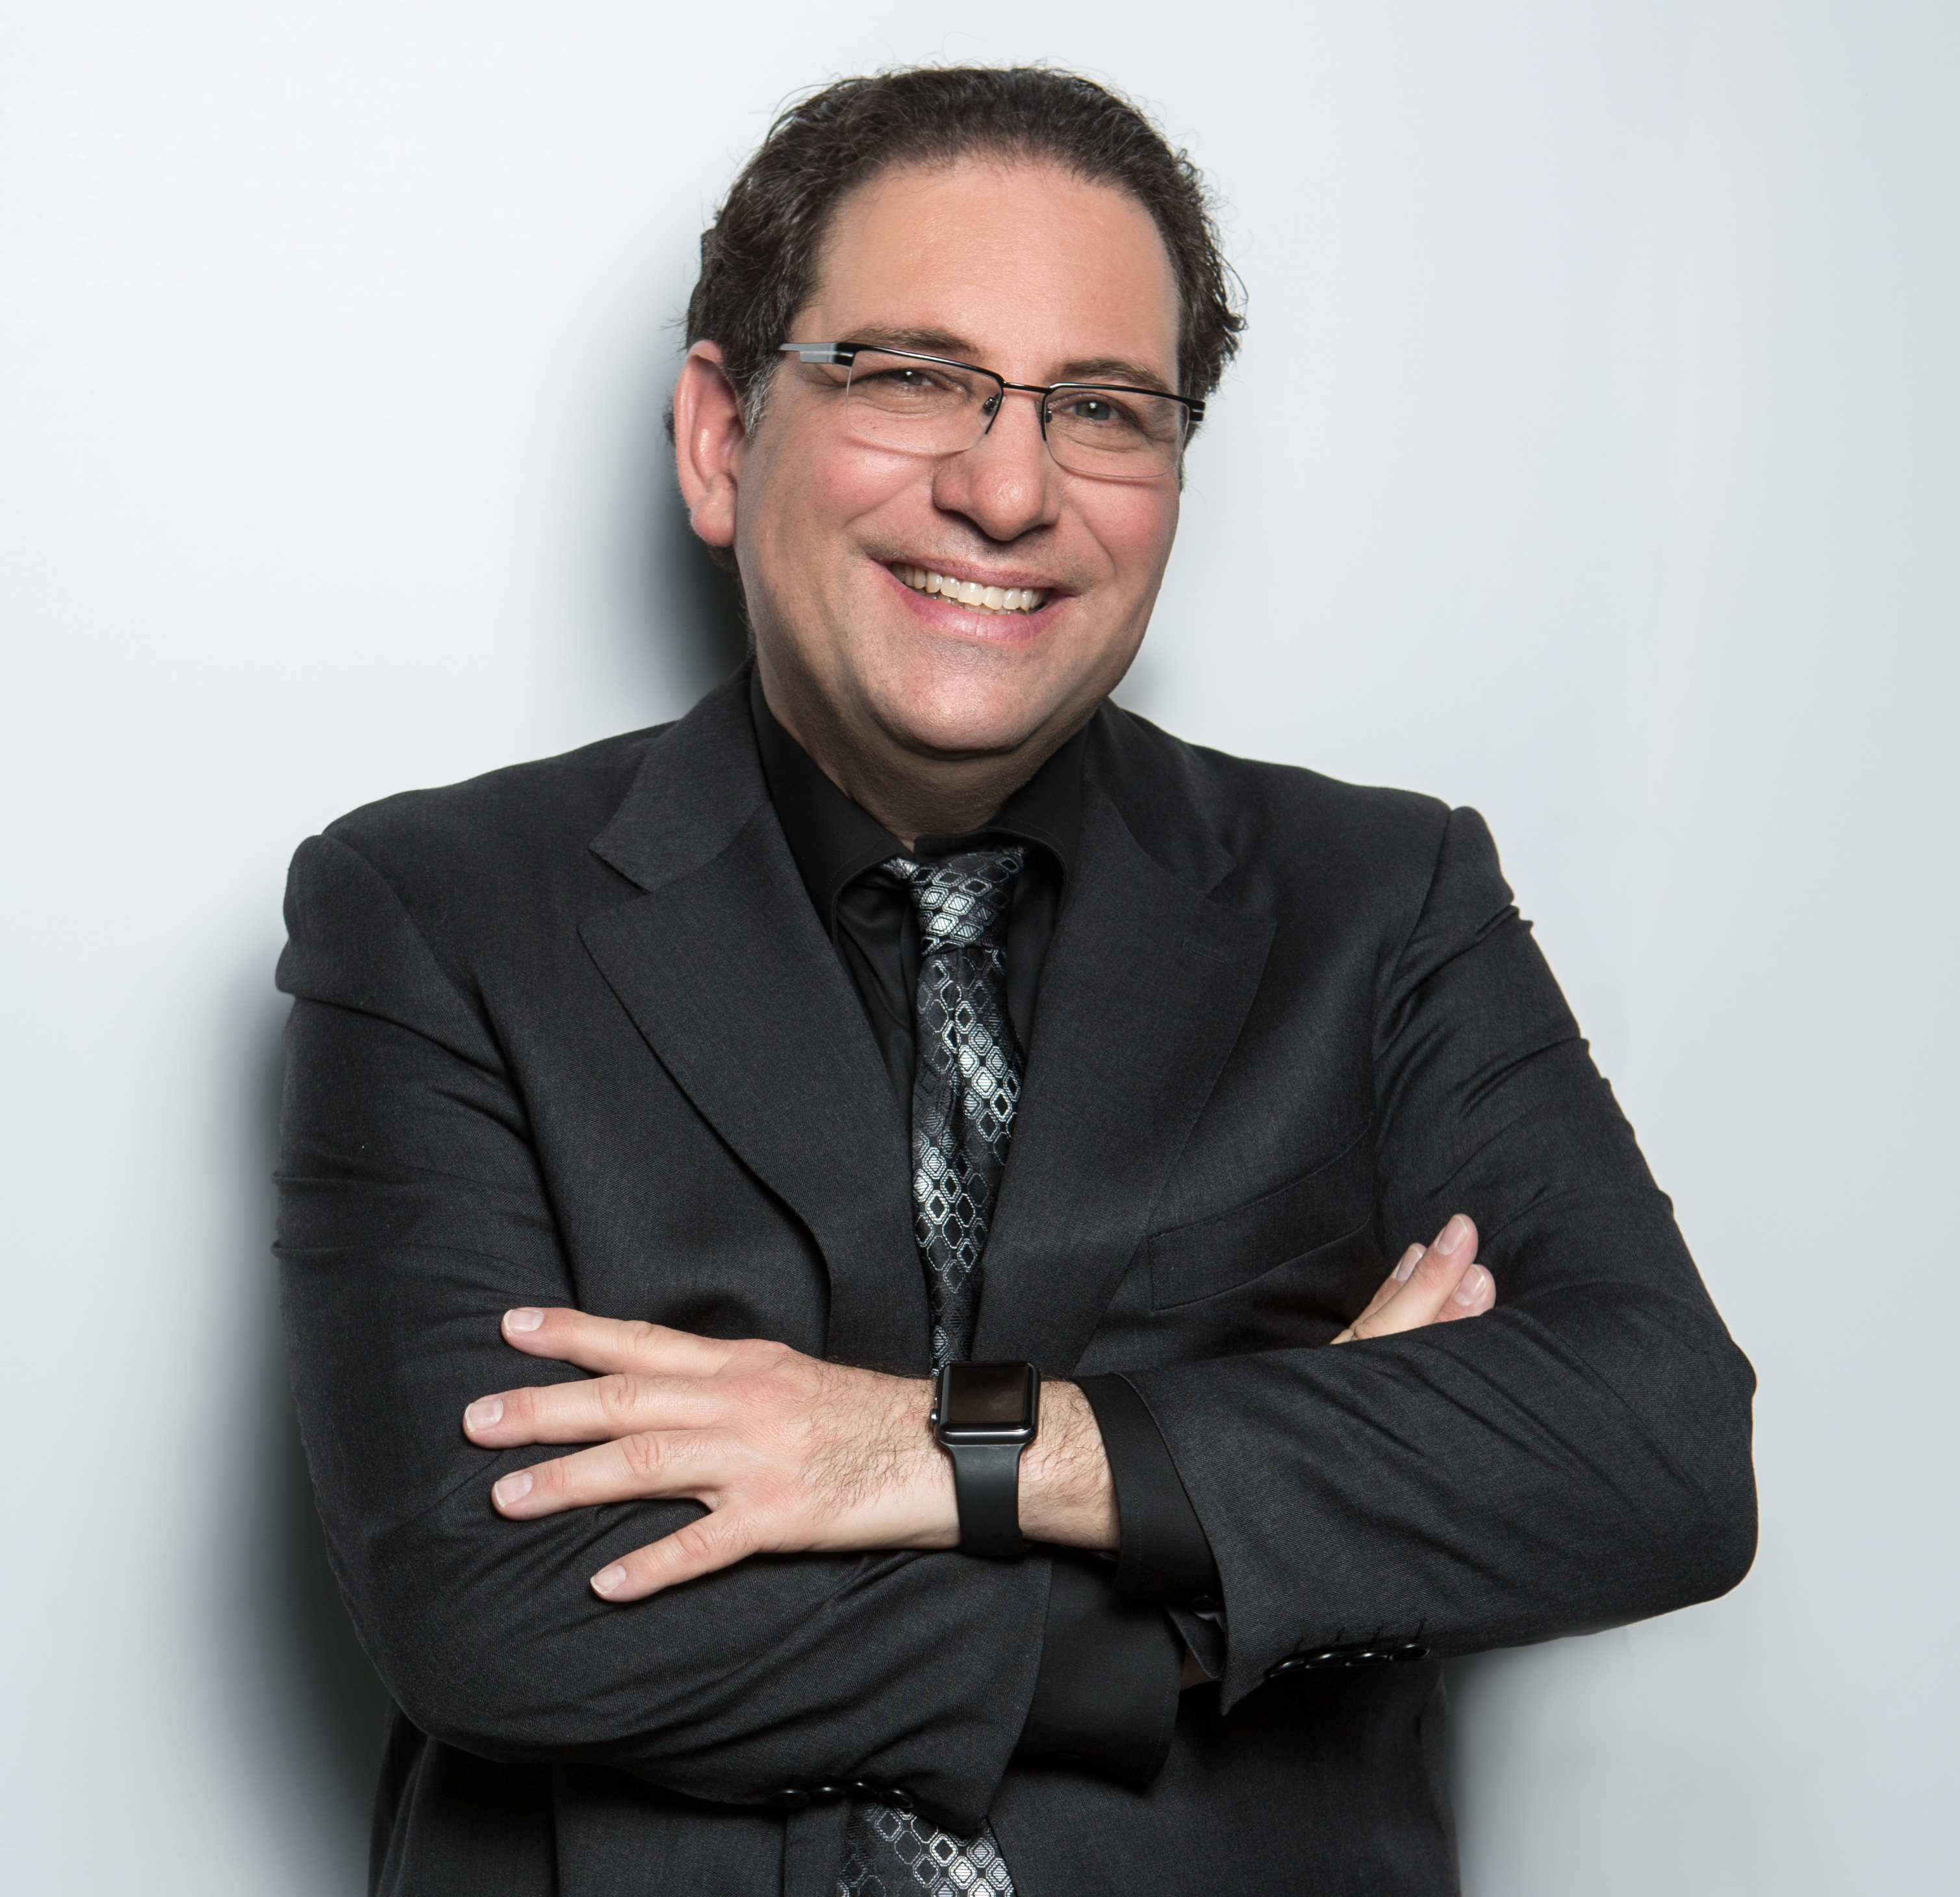 The 58-year old son of father Alan Mitnic and mother Rochell Kramer Kevin Mitnick in 2022 photo. Kevin Mitnick earned a  million dollar salary - leaving the net worth at  million in 2022